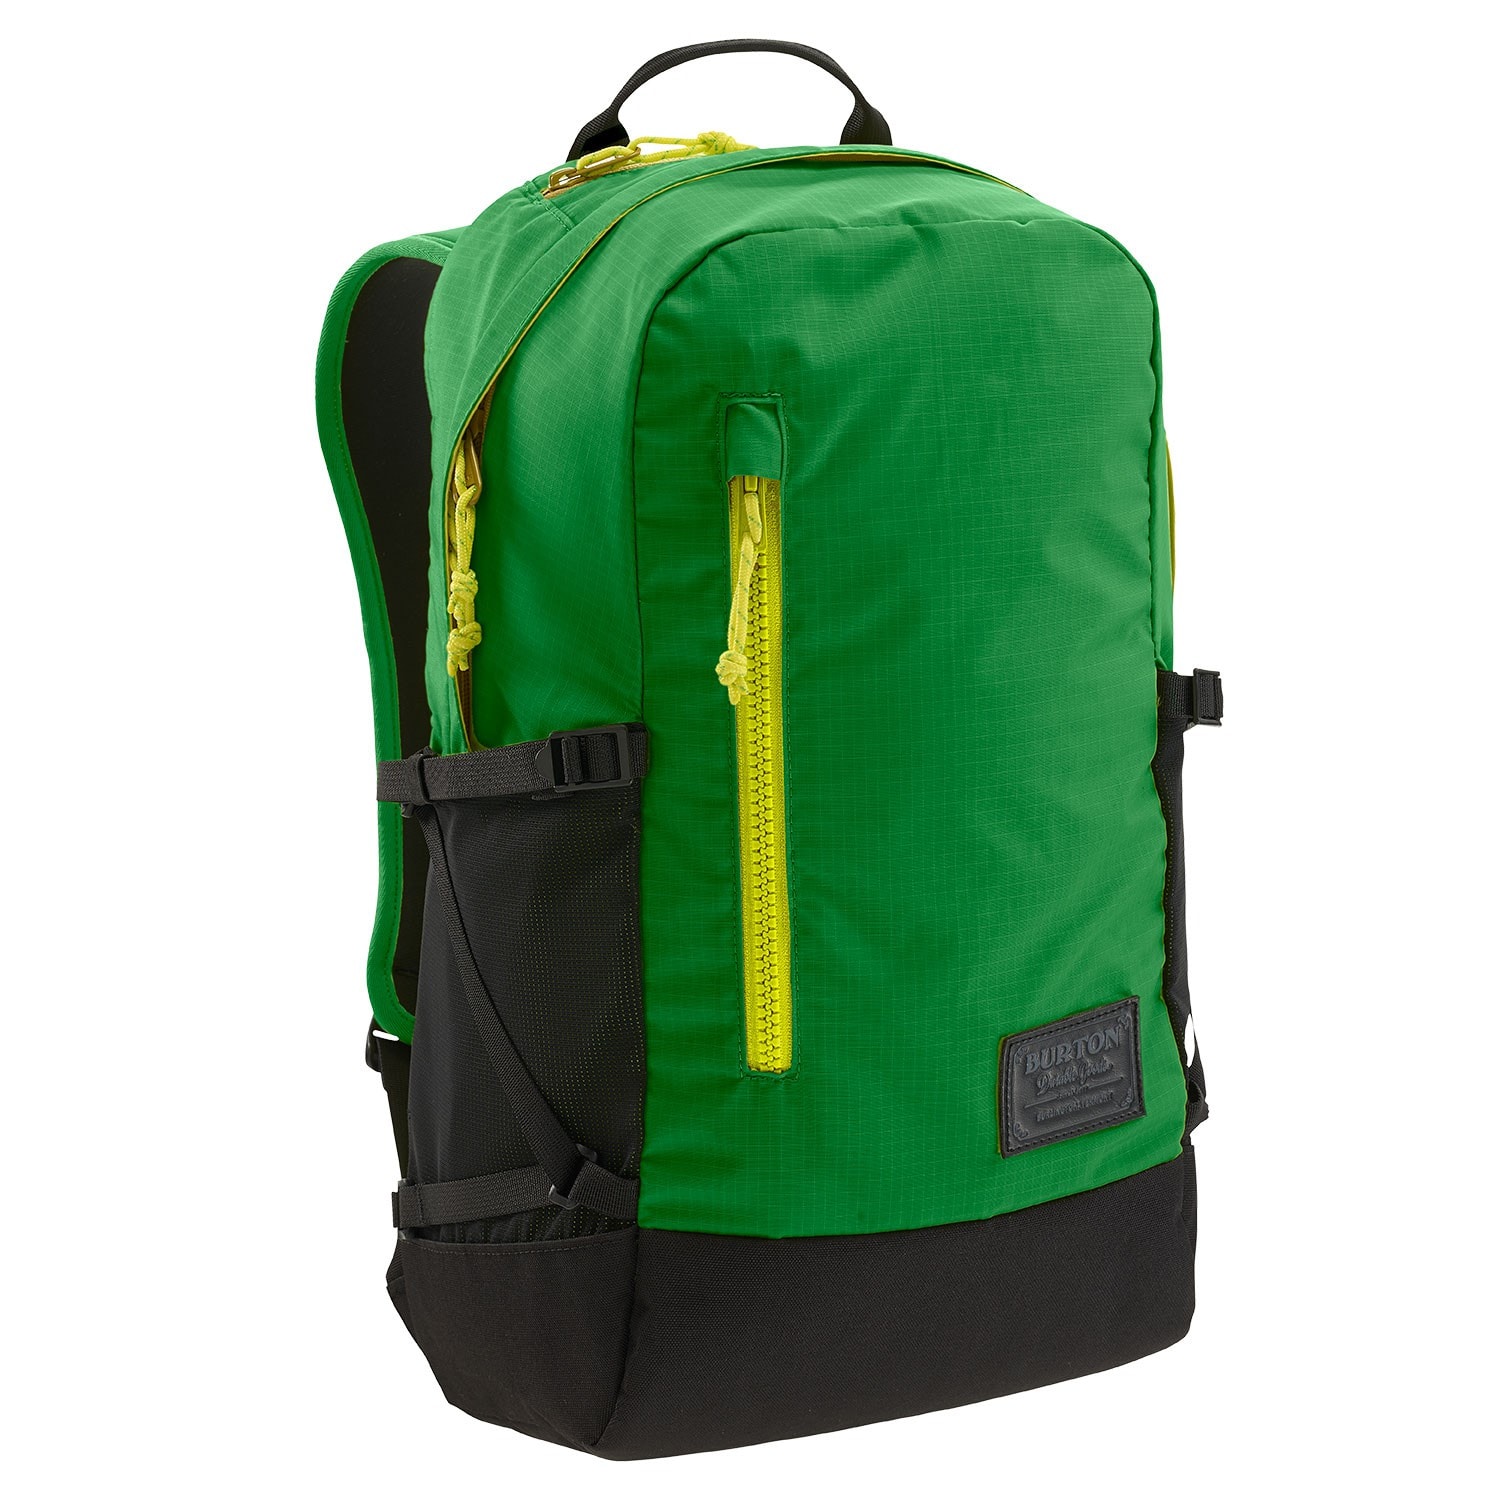 Burton Apollo Backpack, Online Lime Ripstop, One Size | backpack